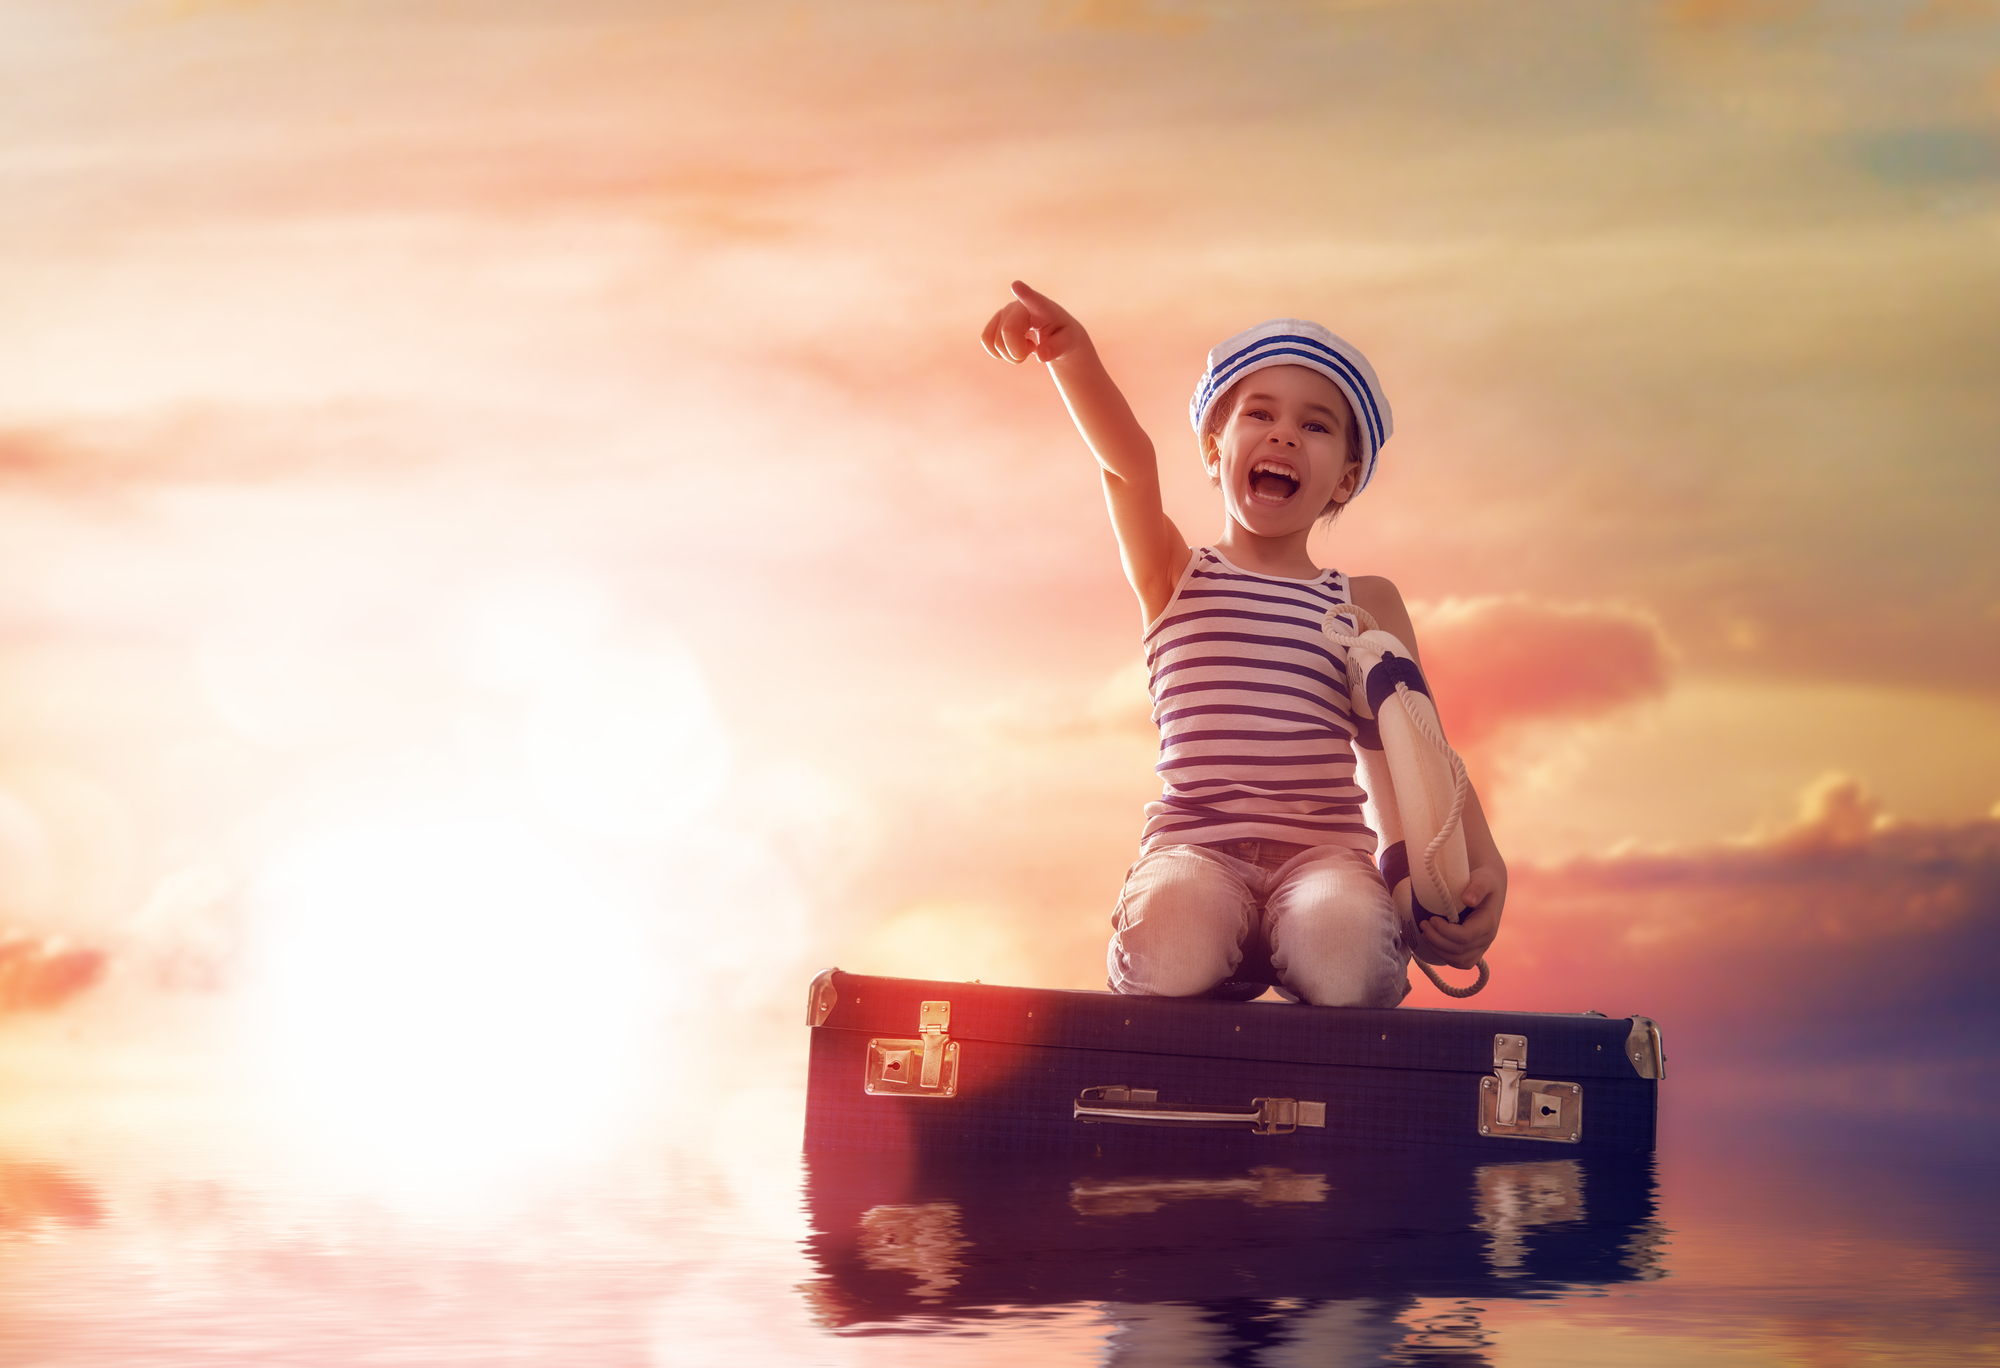 Dreams of travel! Child floats on a suitcase against the backdrop of a sunset.